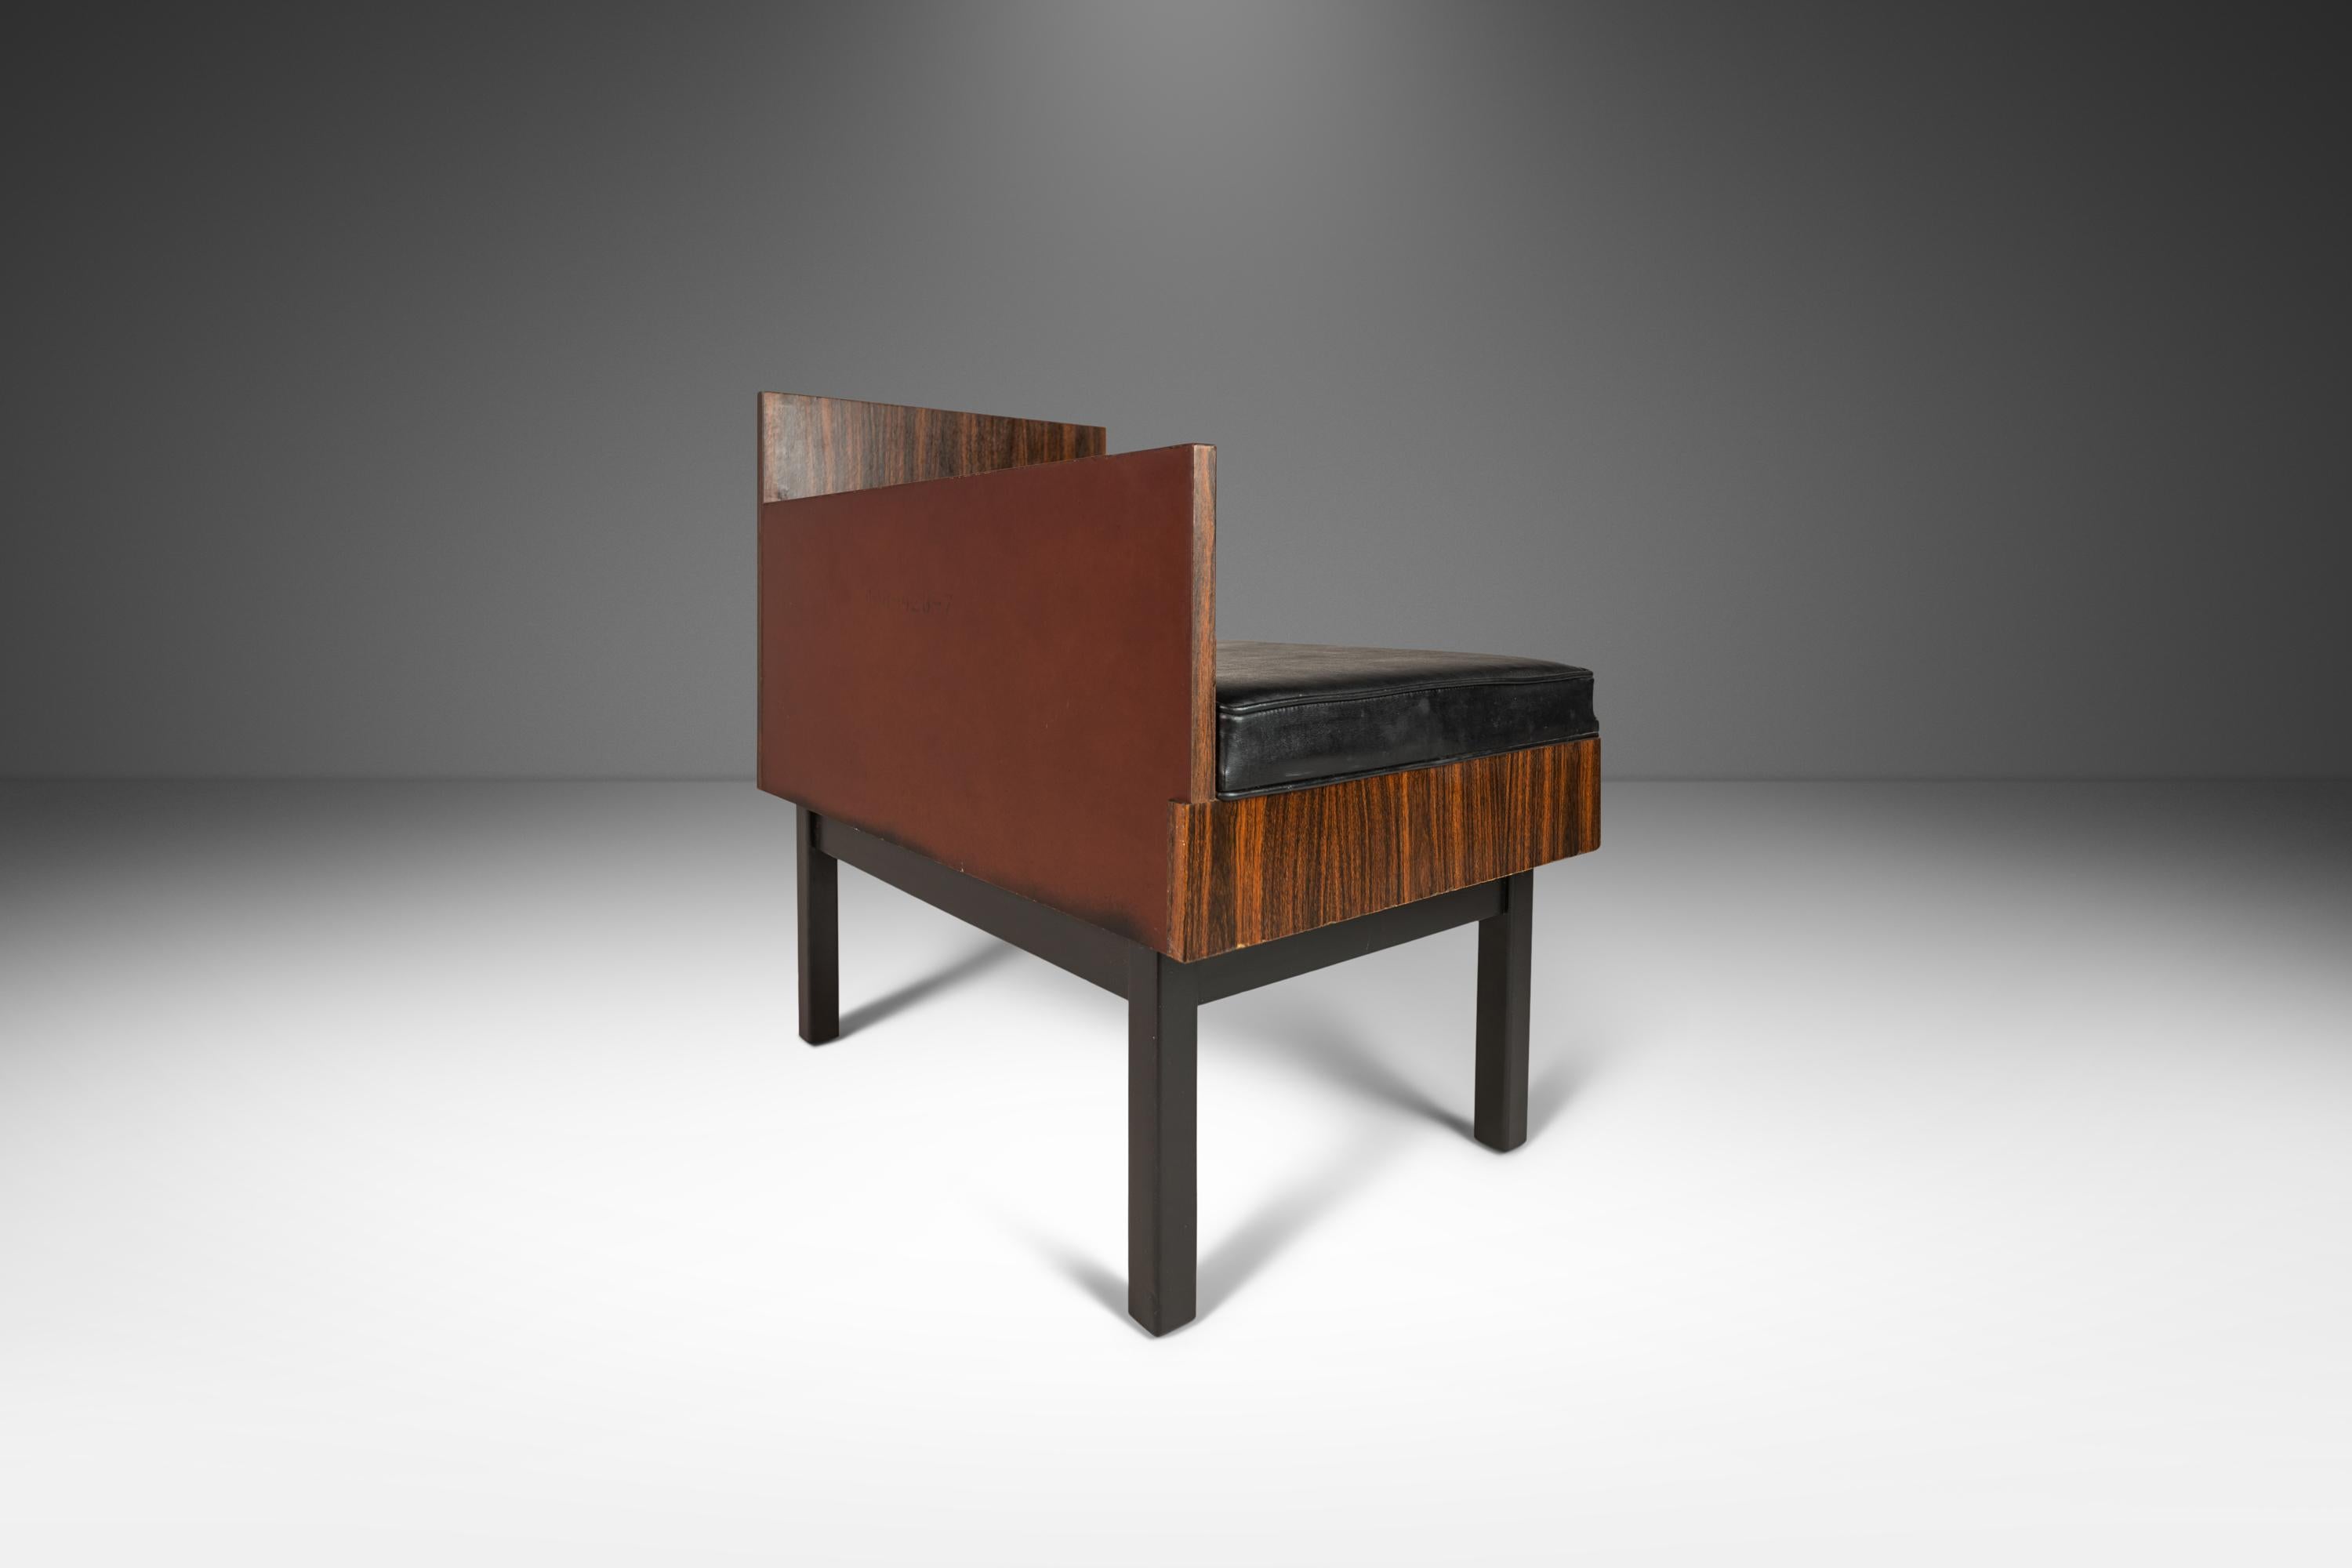 Set of Two ( 2 ) Modular Benches Kissing Benches in Rosewood Laminate, c. 1950's For Sale 4